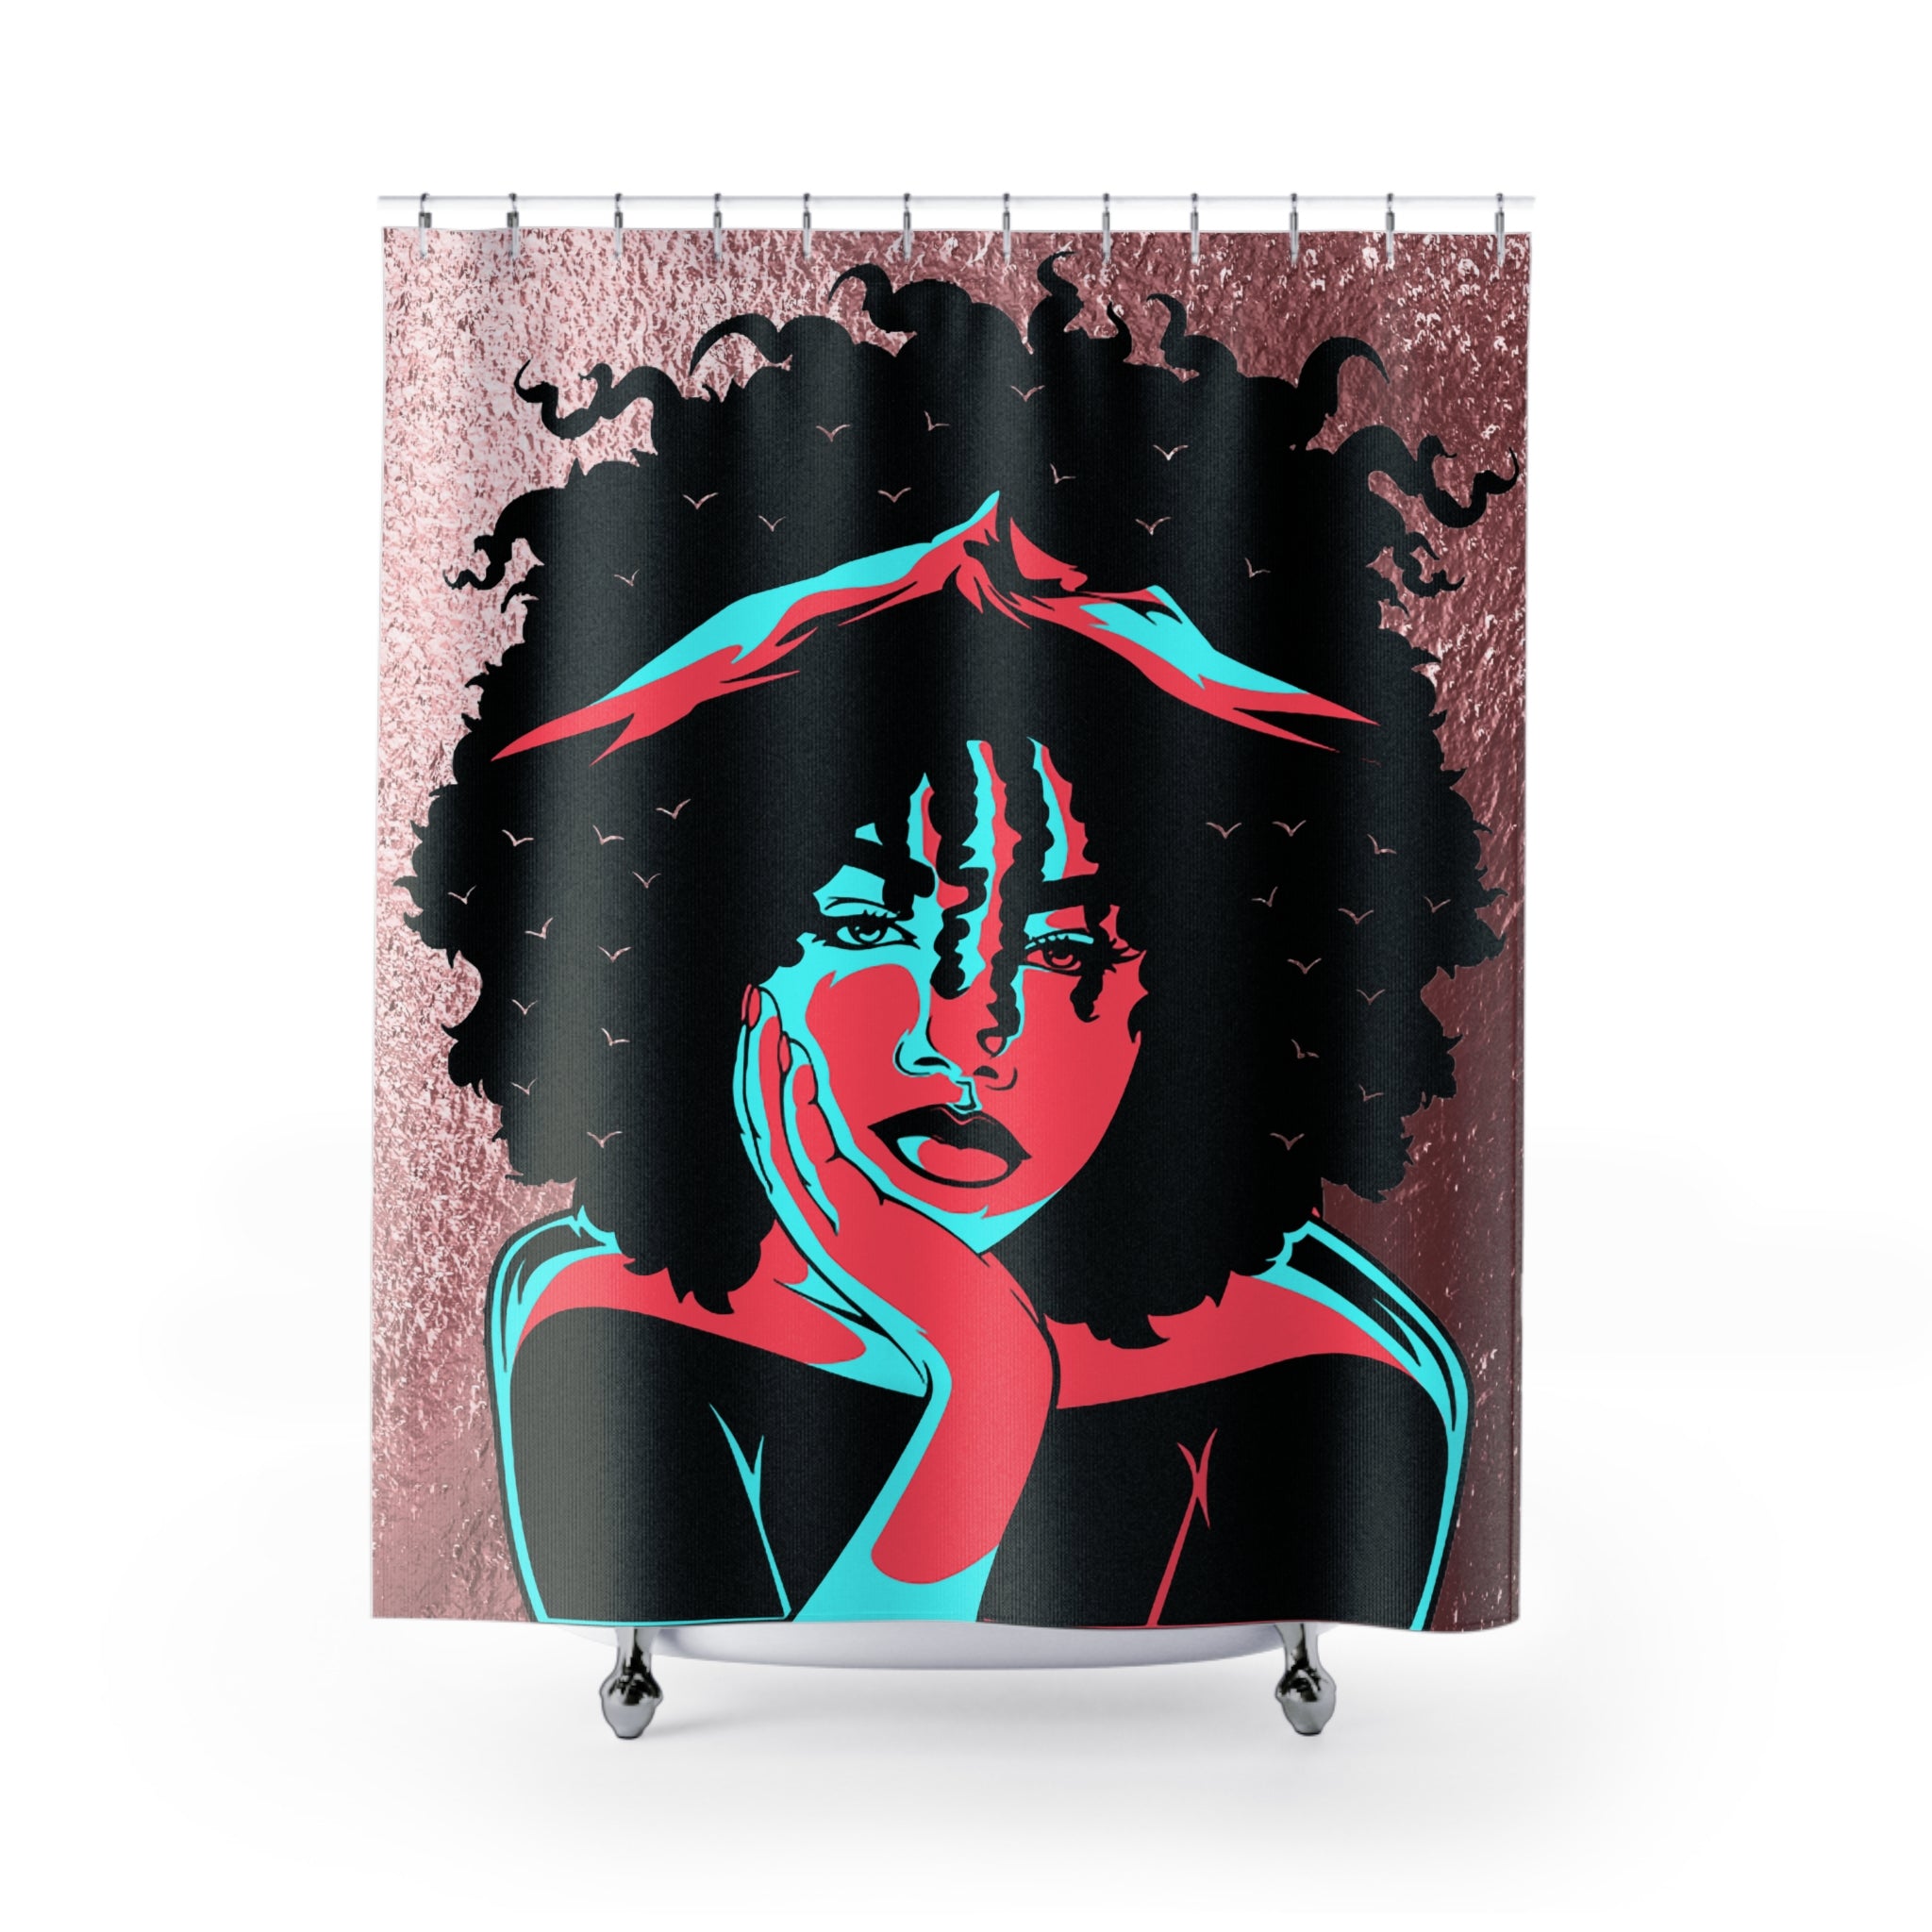 Deep Thoughts Shower Curtain